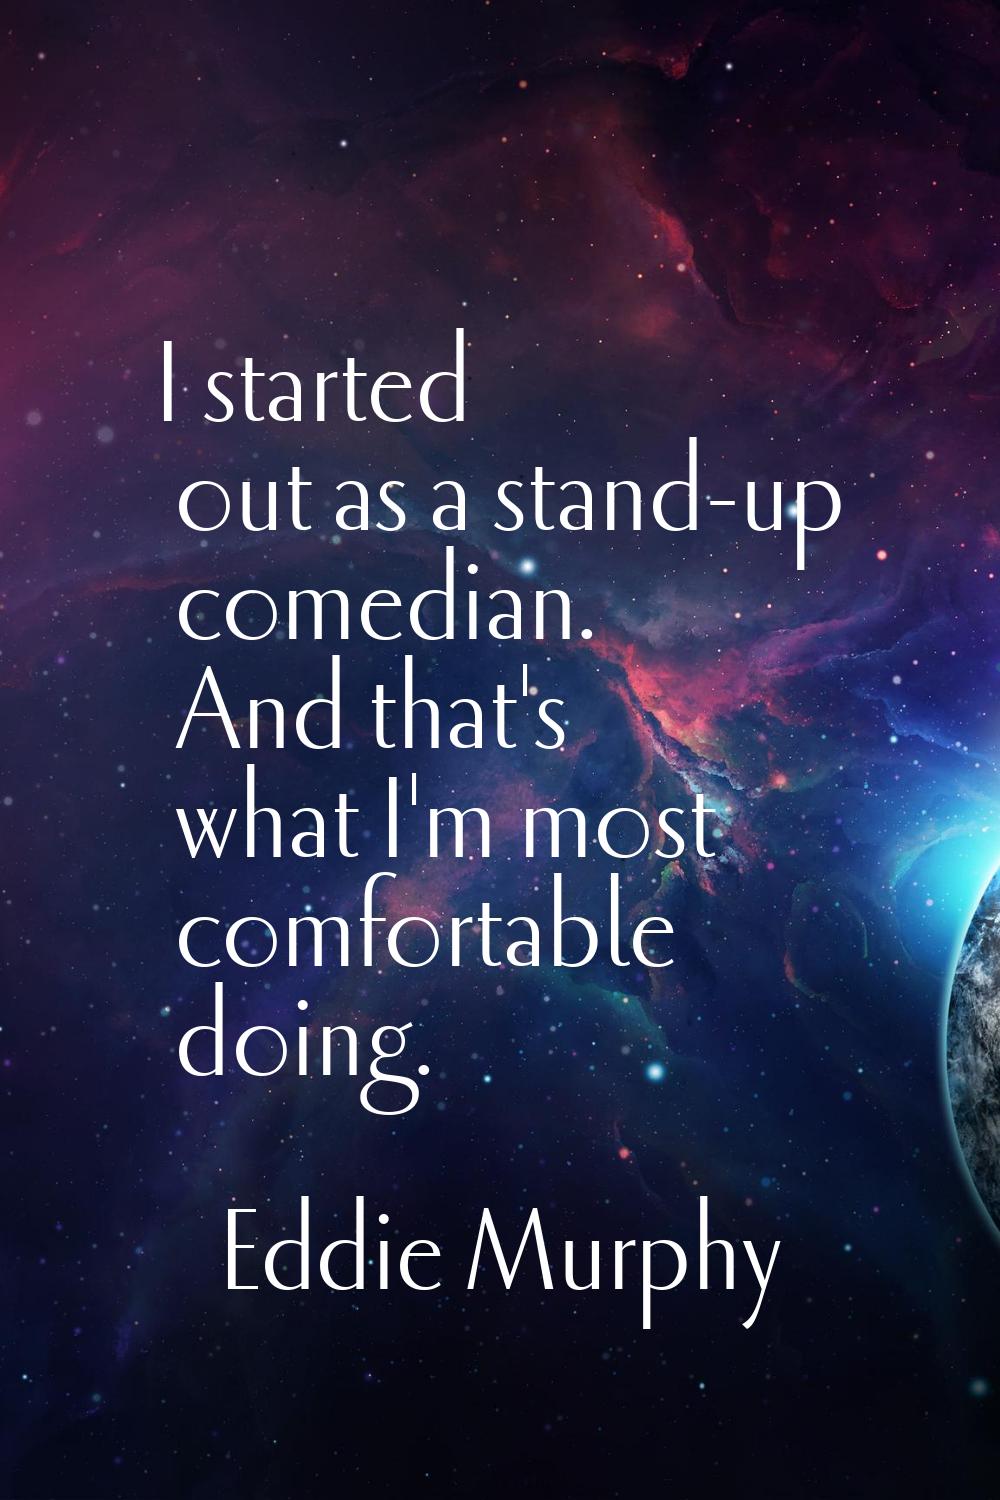 I started out as a stand-up comedian. And that's what I'm most comfortable doing.